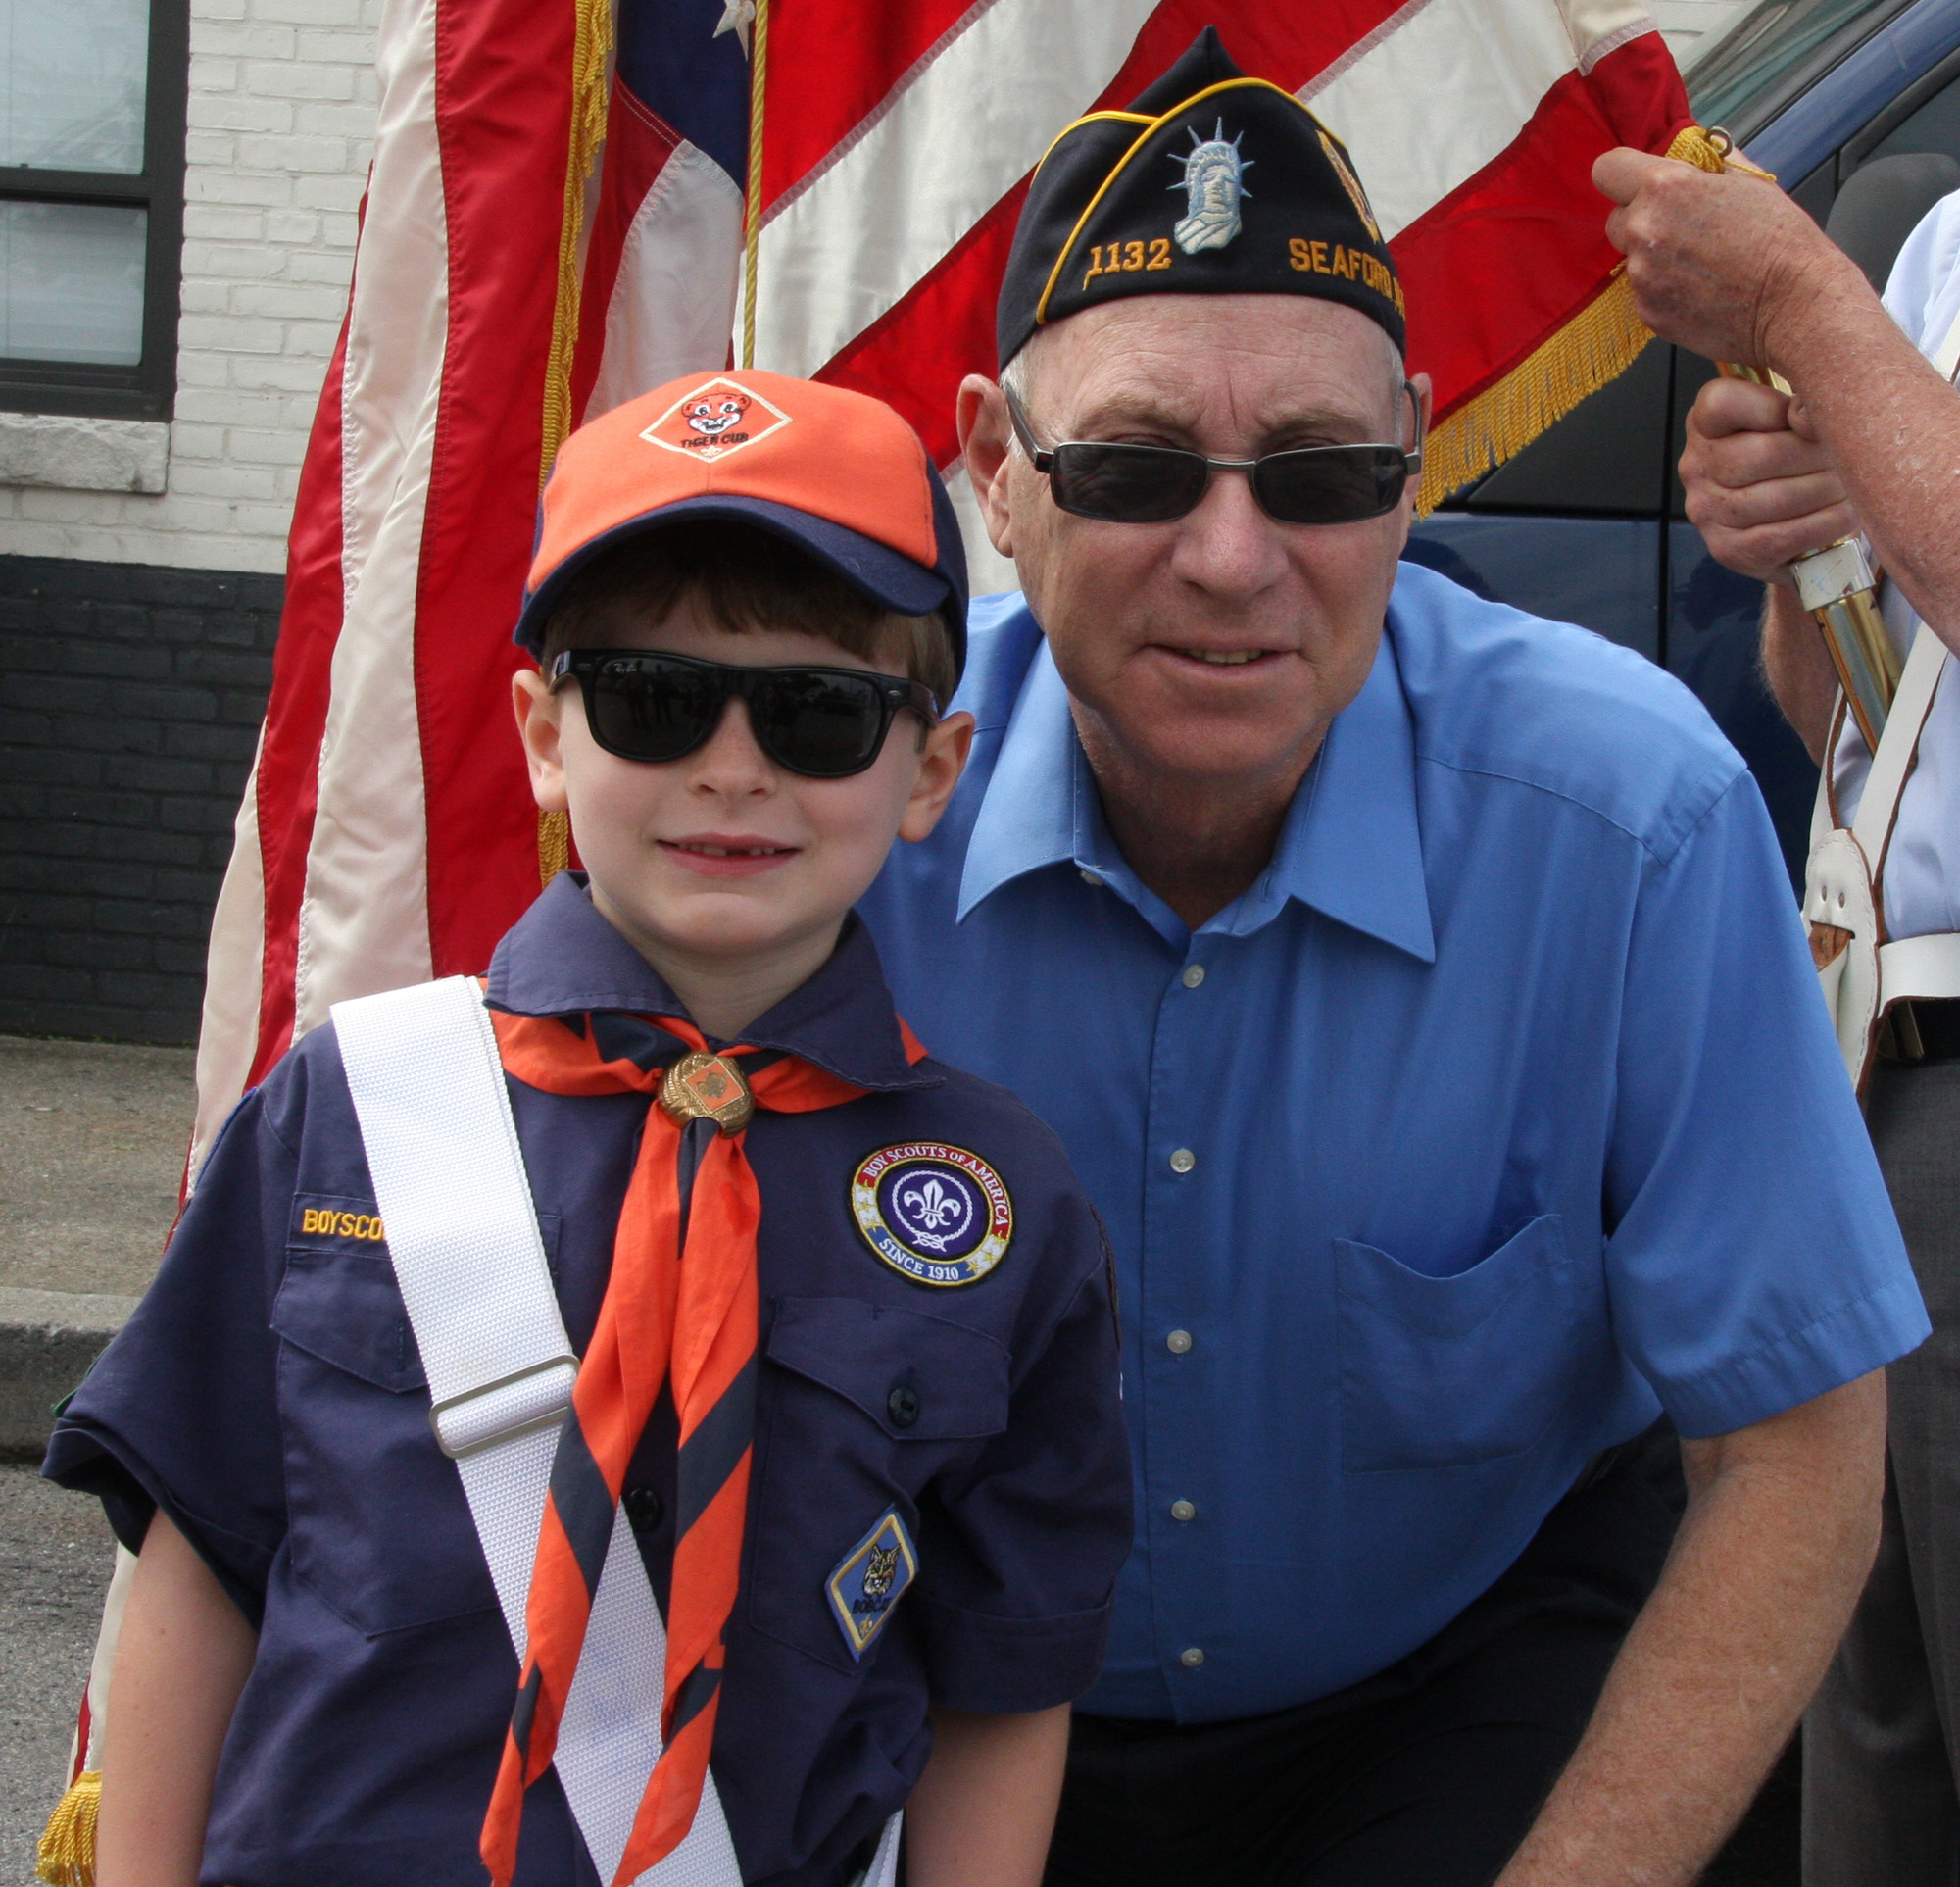 Spencer Richko, 7, was joined by his grandfather, Bill Richko, a Vietnam veteran and member of the Seaford American Legion